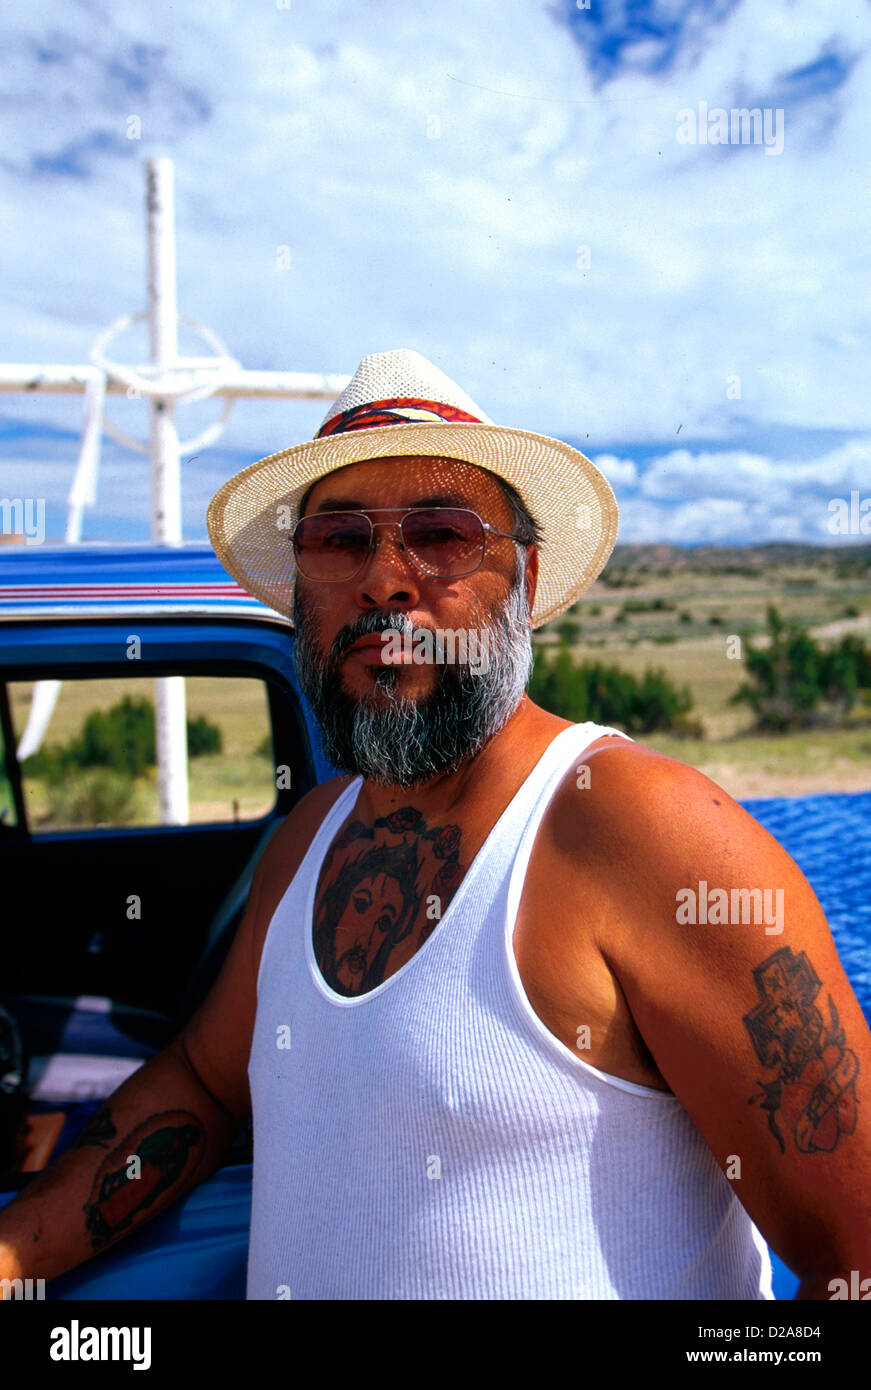 Mexican American Man with Tattoos Memorial et religieux Banque D'Images